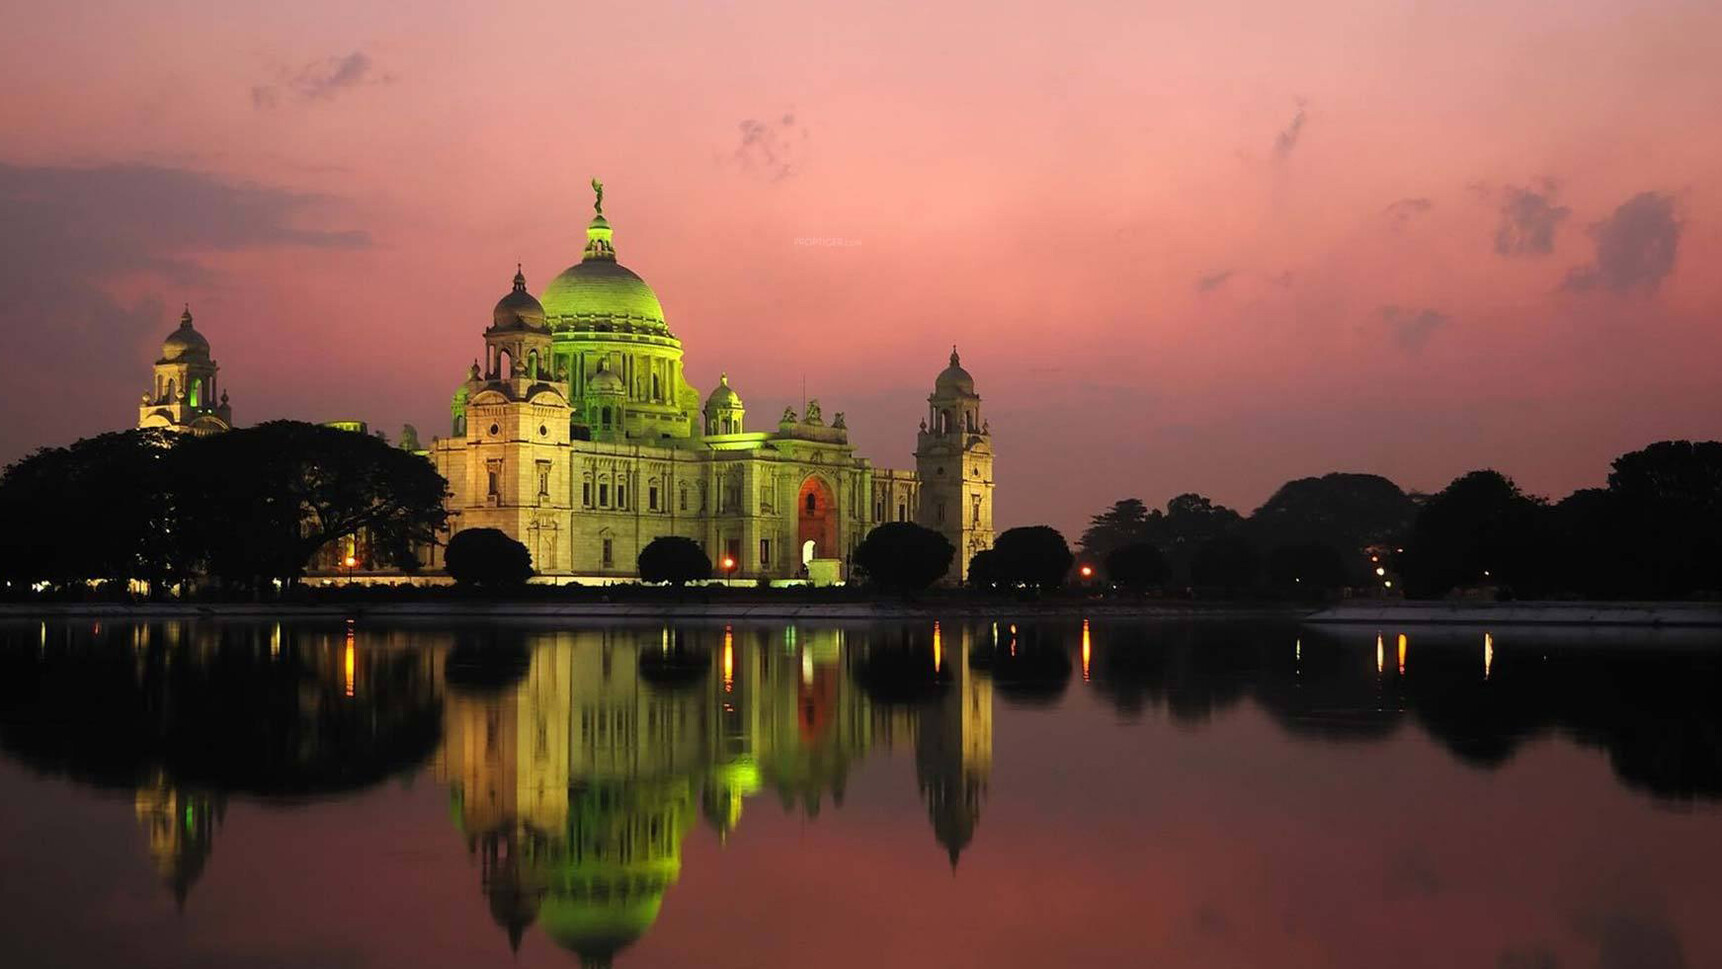 Ancient Monuments of Kolkata known as Calcutta, the City of Joy